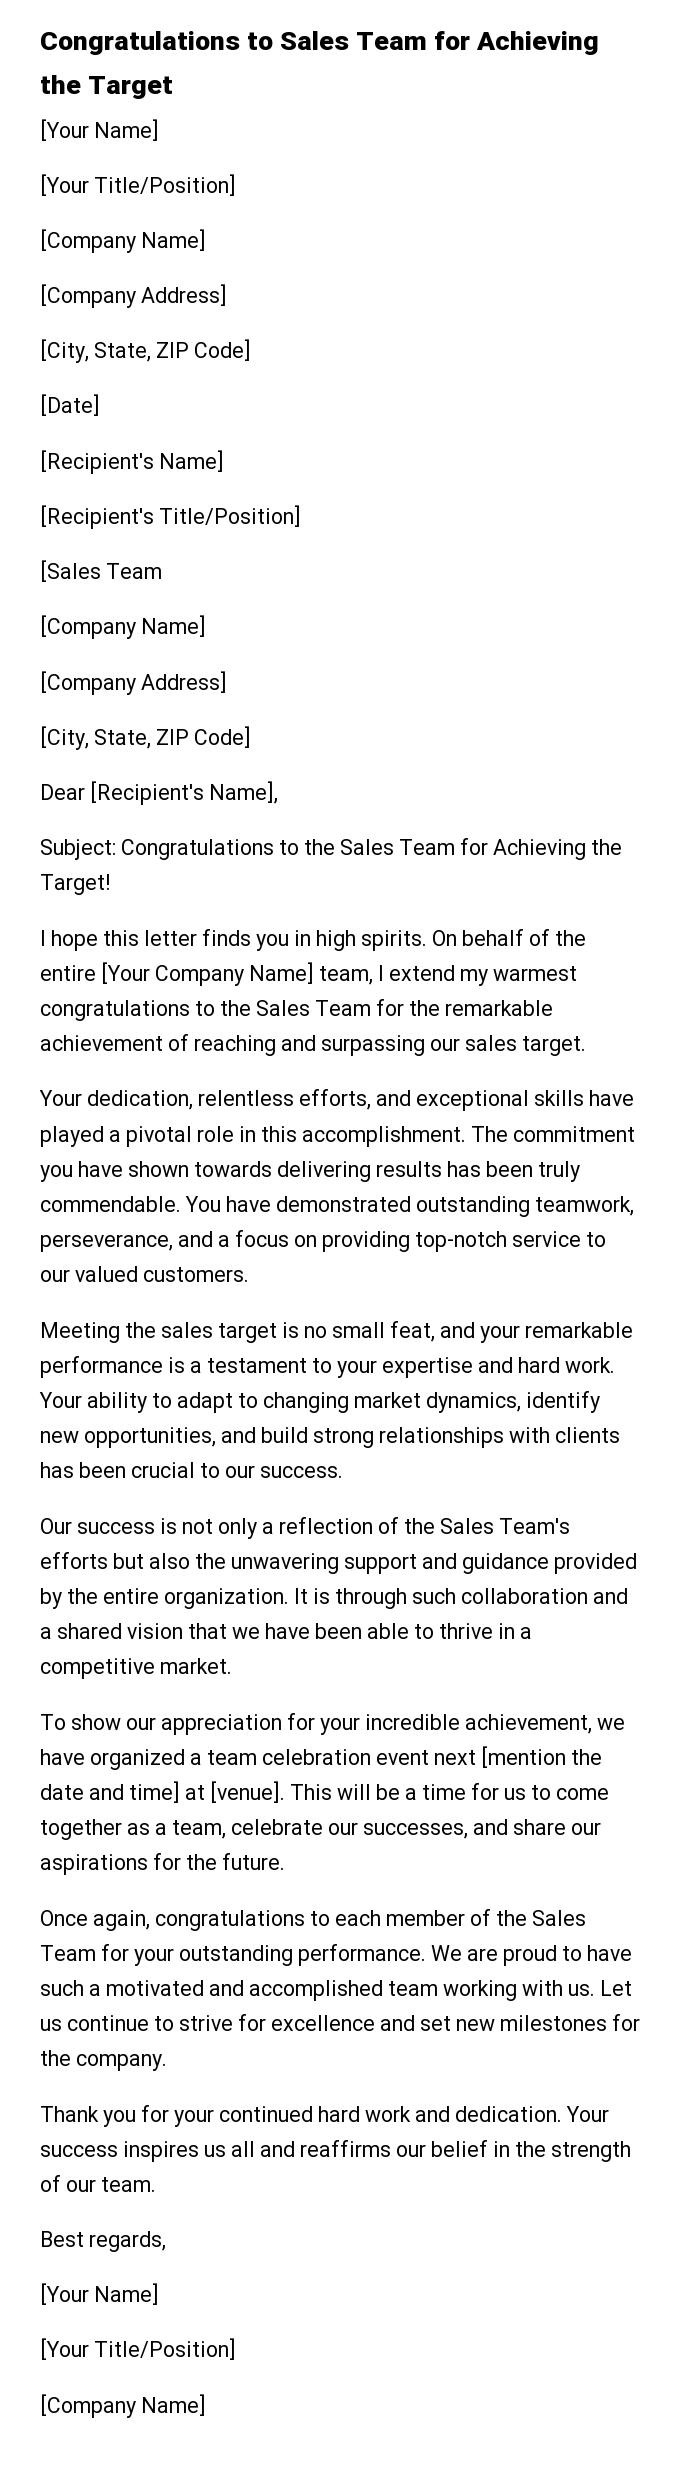 Congratulations to Sales Team for Achieving the Target